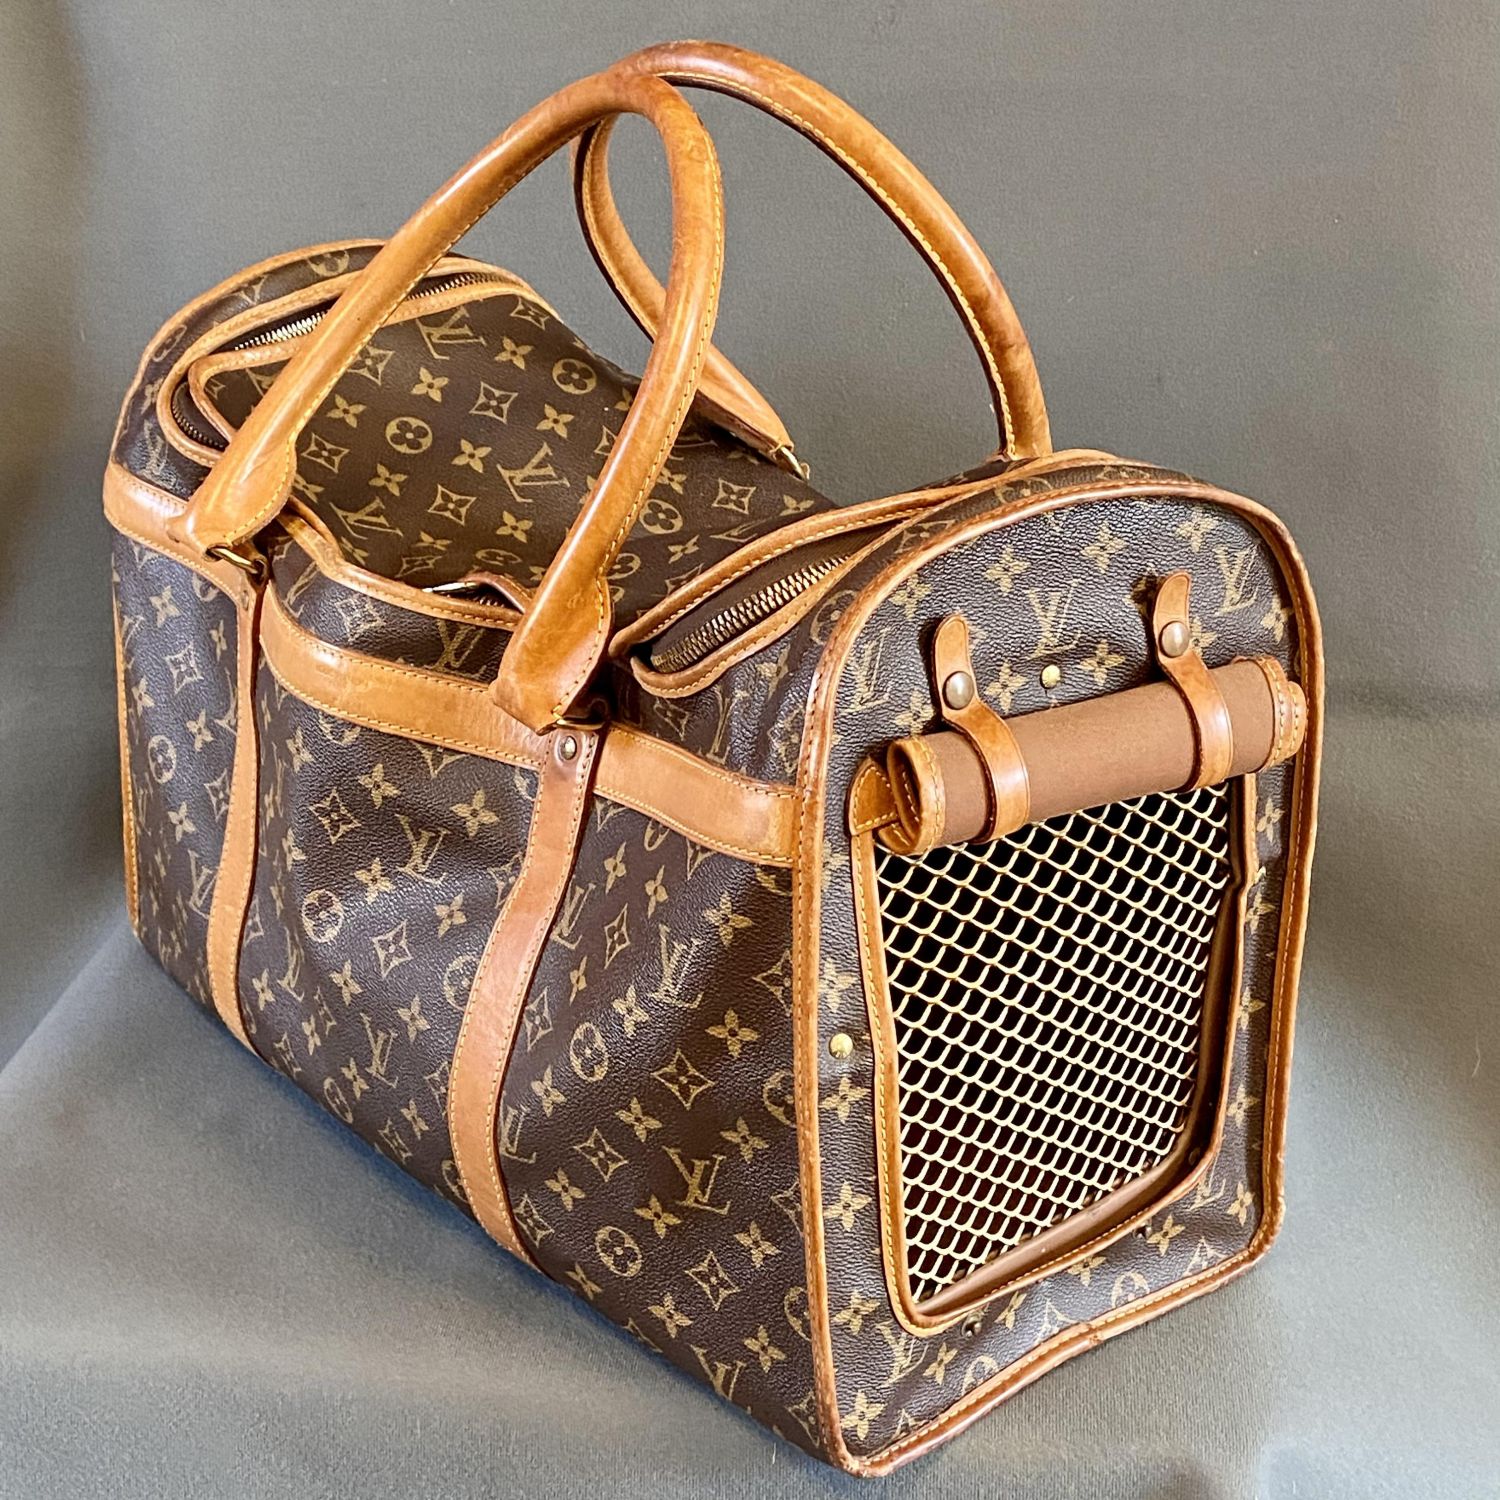 Louis Vuitton Year Of The Dog